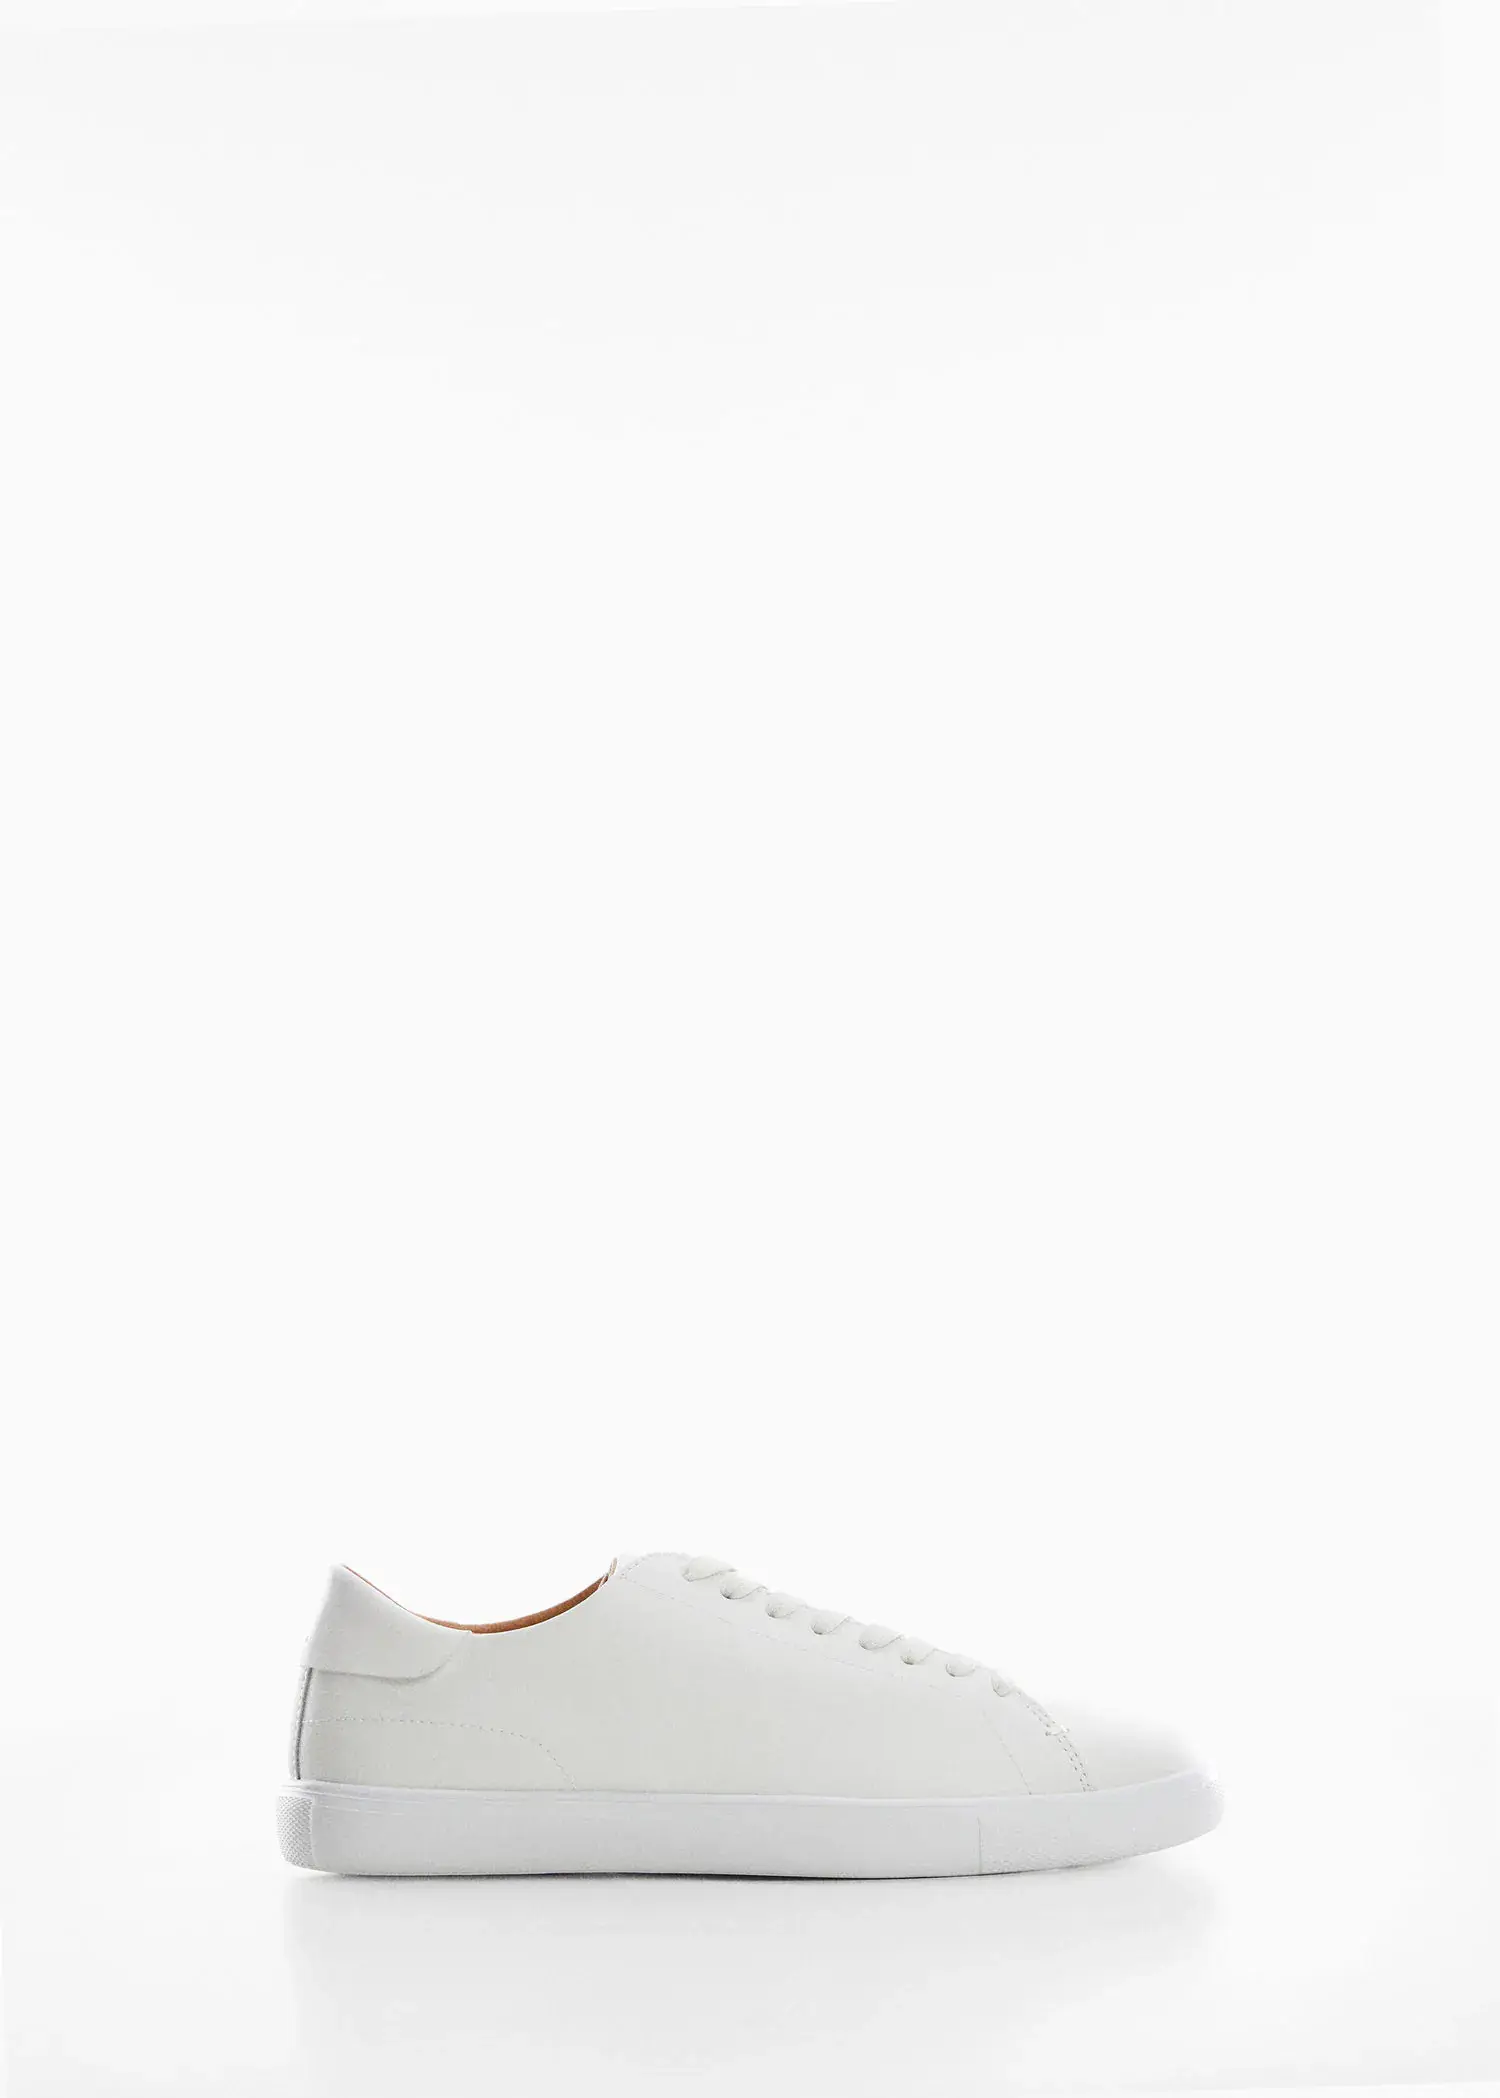 Mango Noncolored leather sneakers. a pair of white shoes on a white background. 